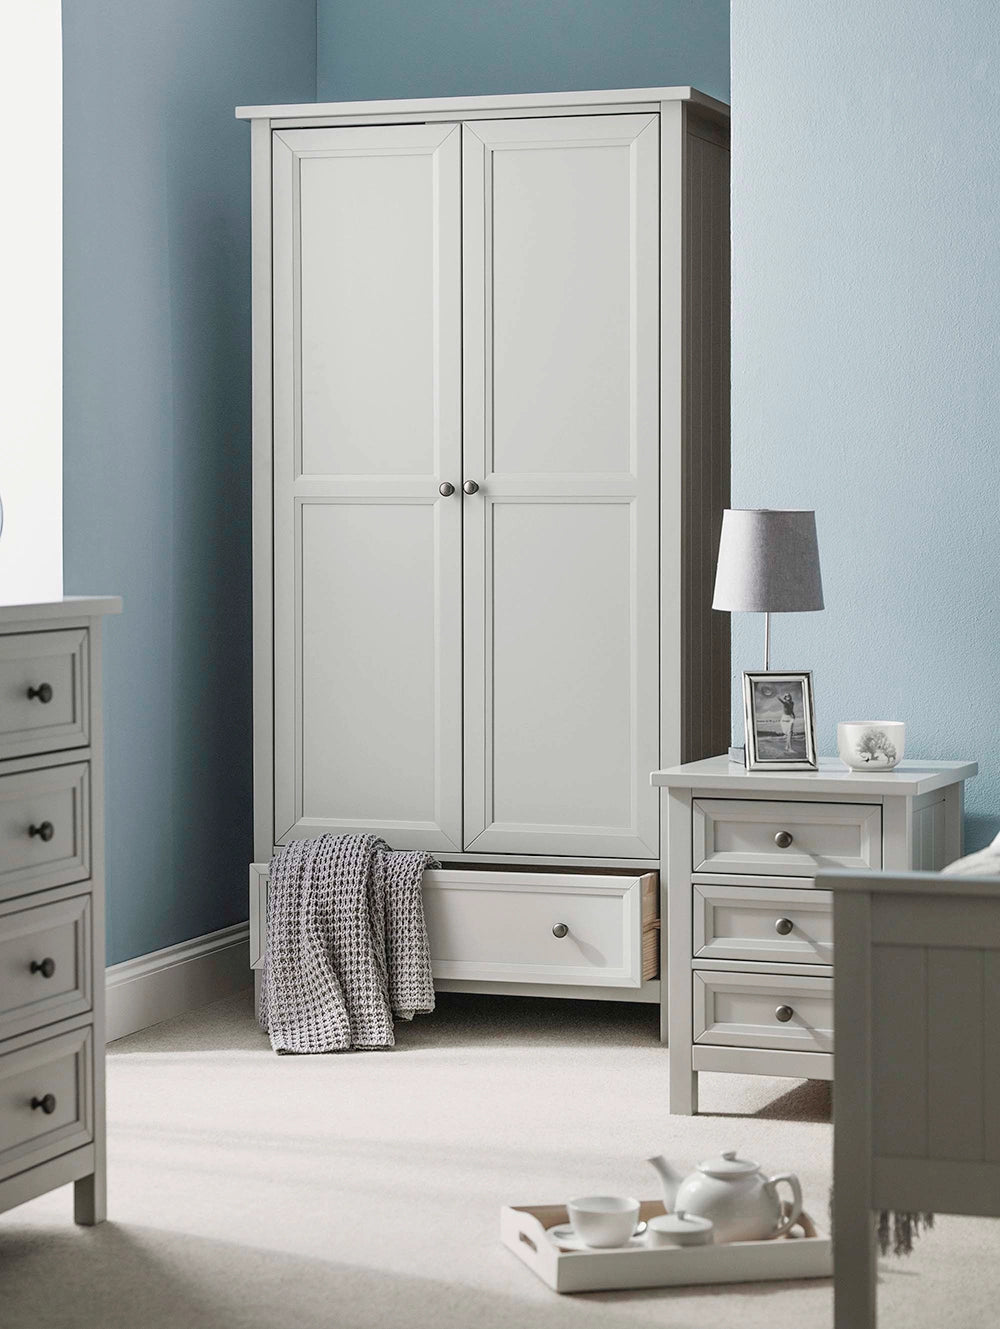 Anne 2 Door Combination Wardrobe in Dove Grey Finish with Grey Lampshade in Bedroom Setting